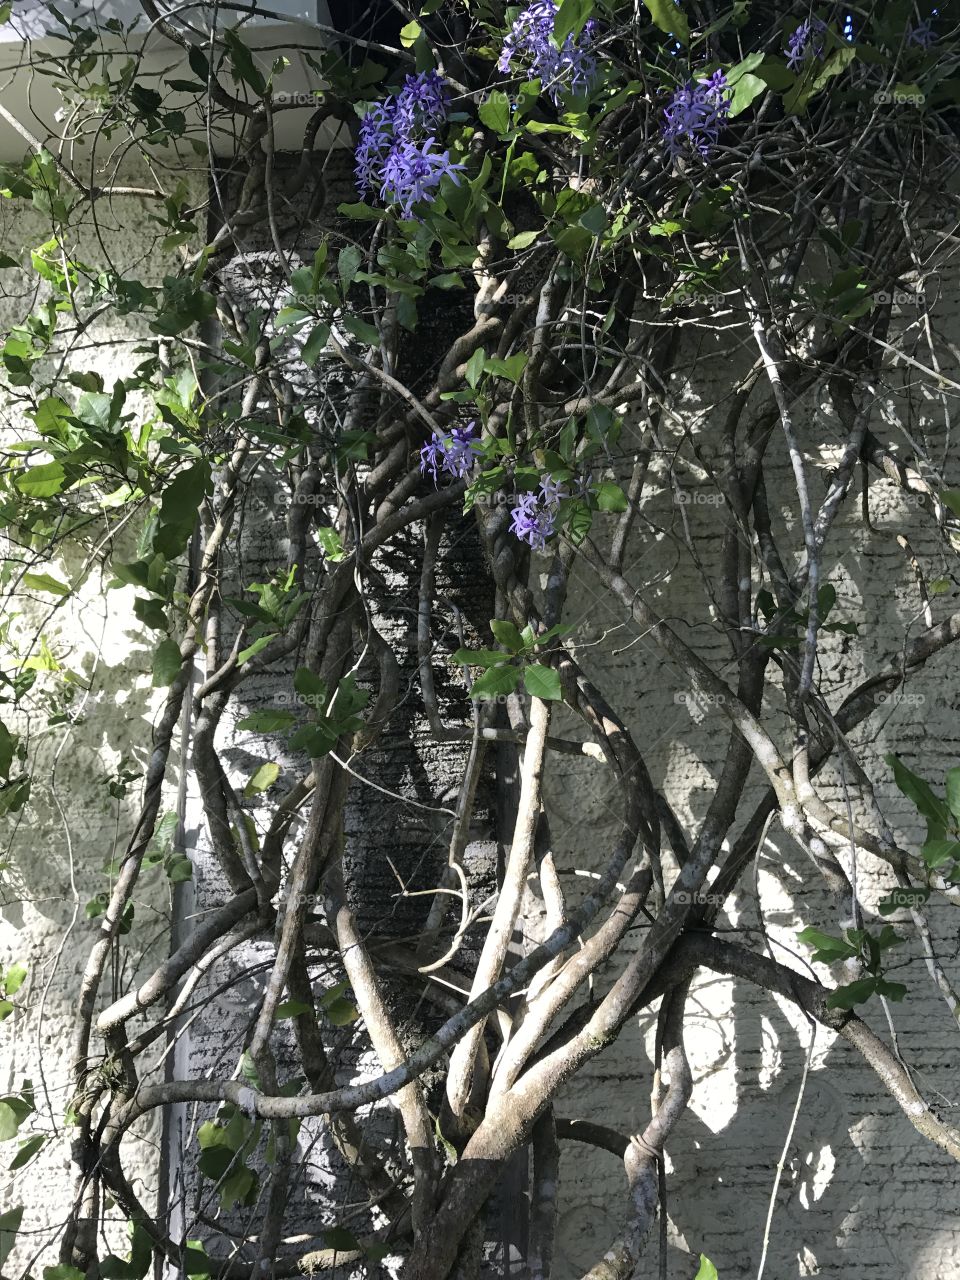 Lovely blue flowers on this climber 